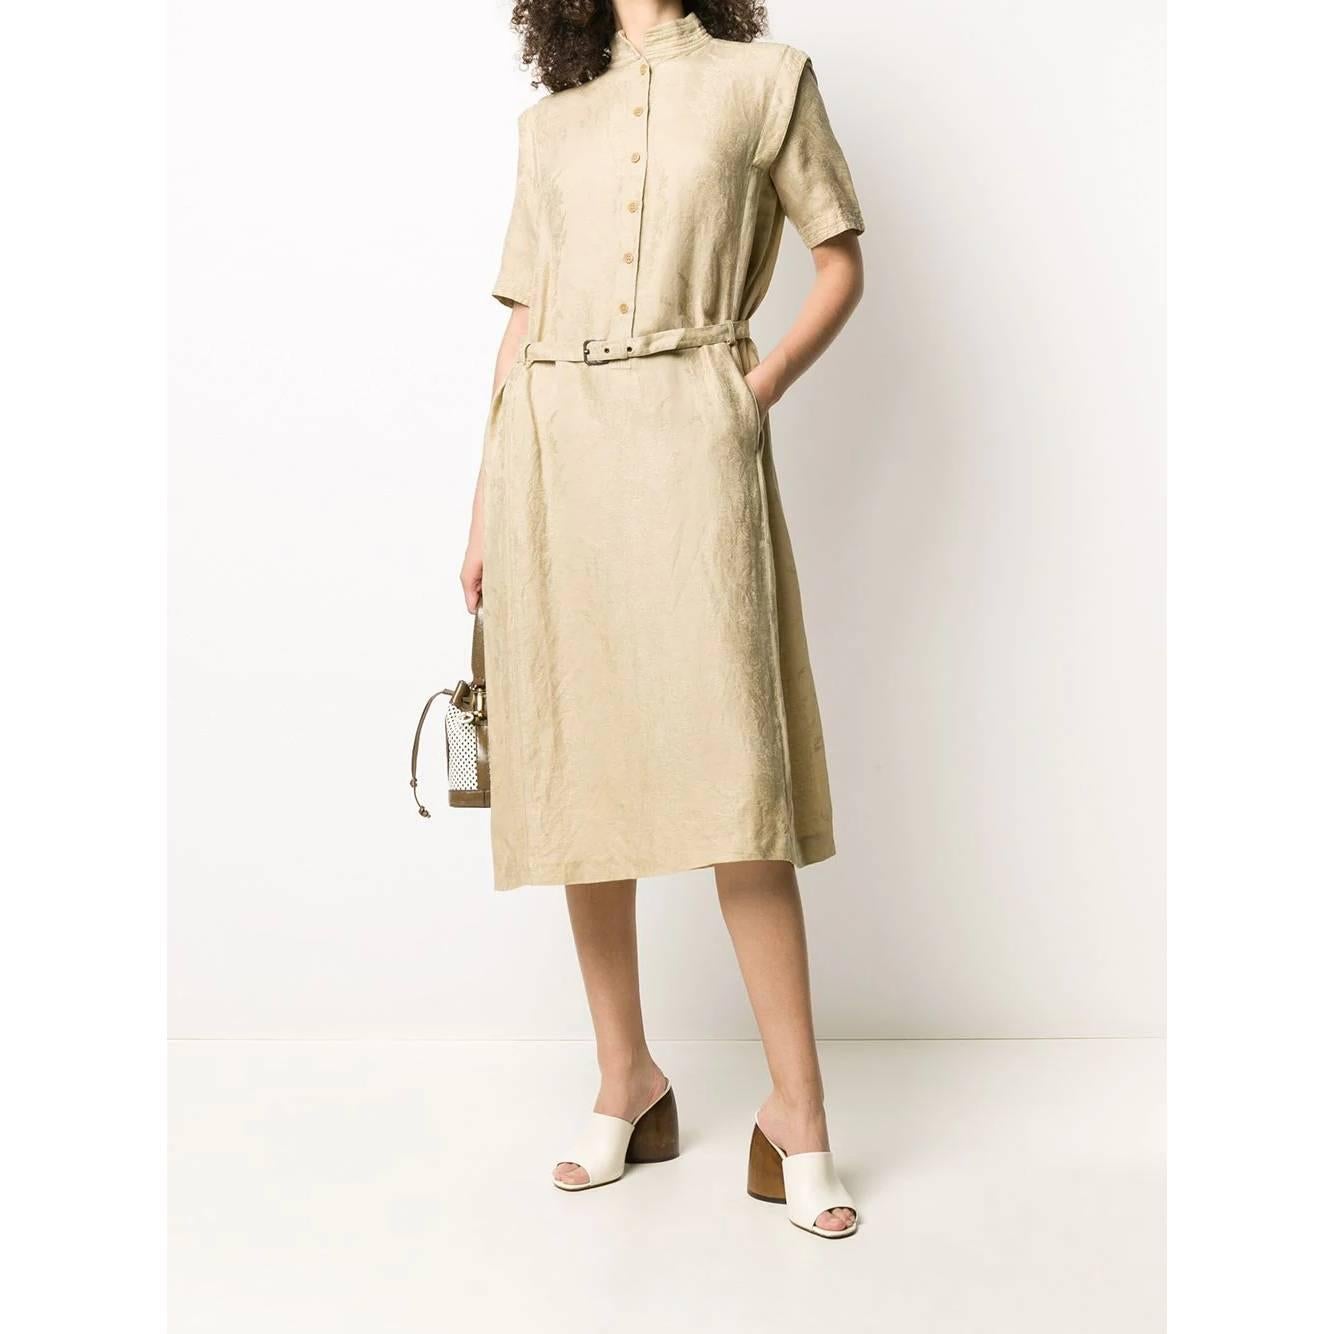 A.N.G.E.L.O. Vintage - ITALY

Christian Dior beige linen blend jacquard dress. Raised collar, front buttons and waist belt.

Years: 80s

Made in Italy

Size: 46 IT

Flat measurements

Height: 118 cm
Bust: 53 cm
Shoulders: 38 cm
Sleeves: 28 cm